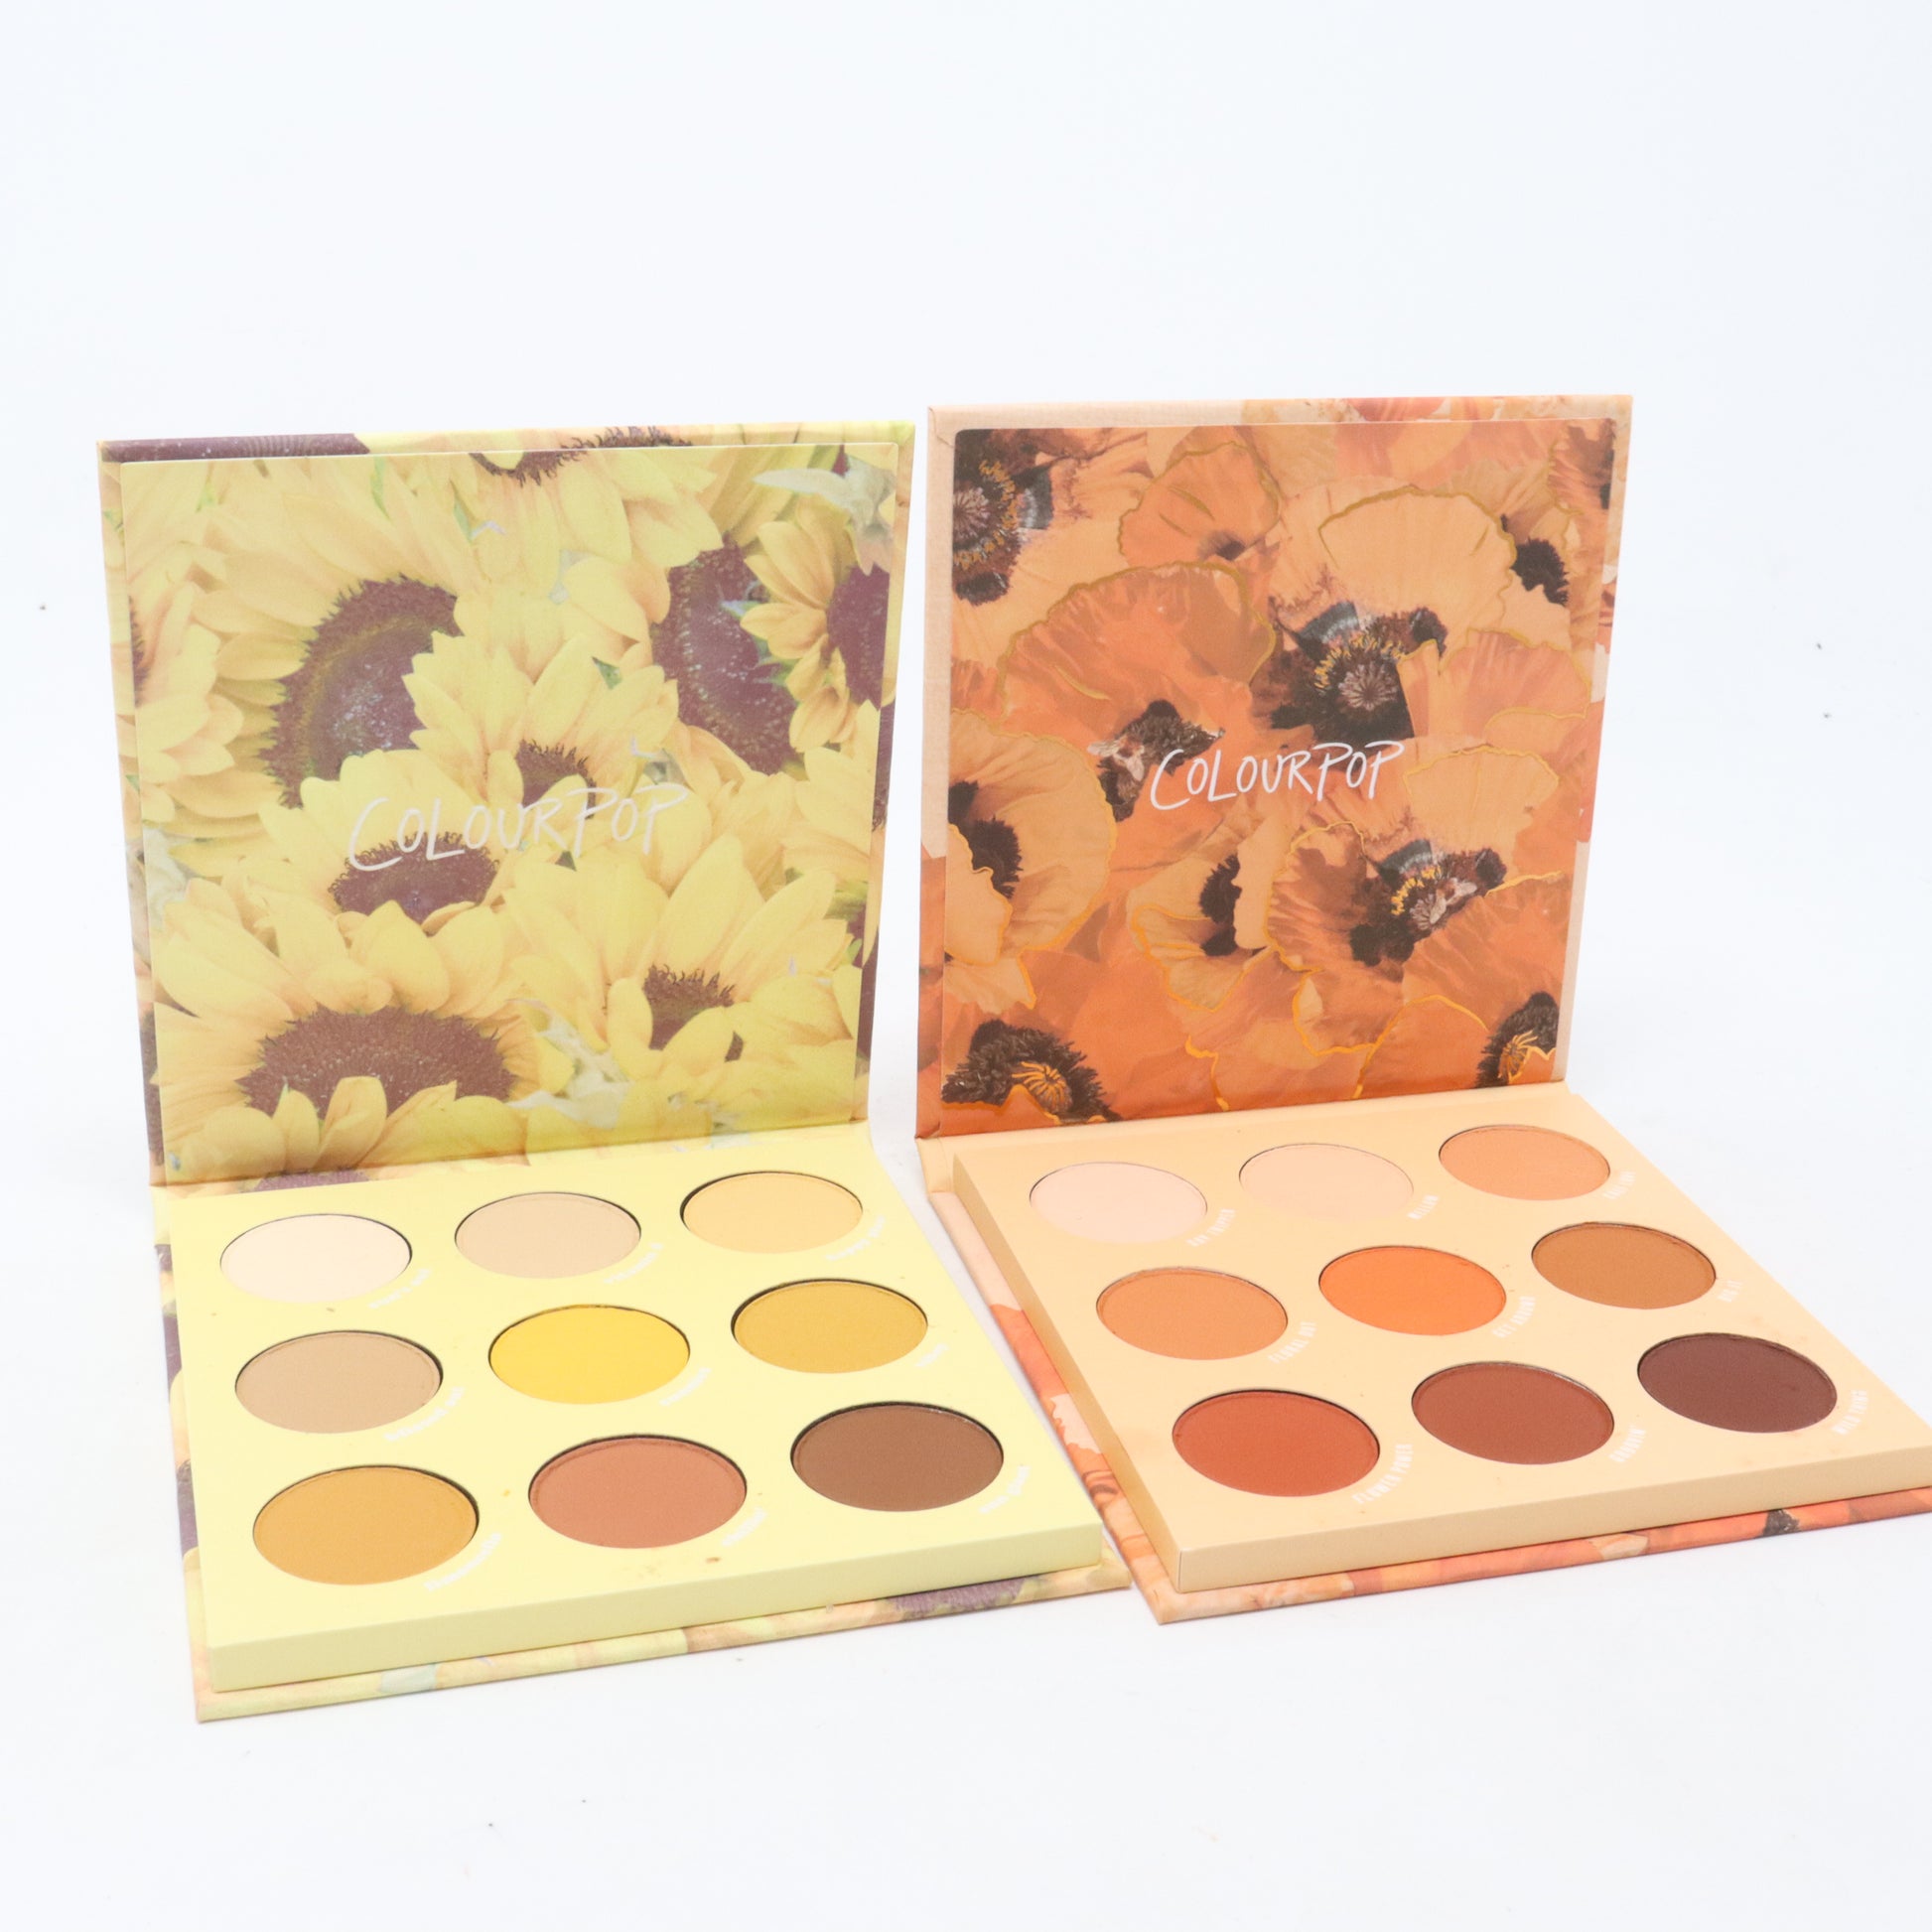 Into Bloom Palette Duo